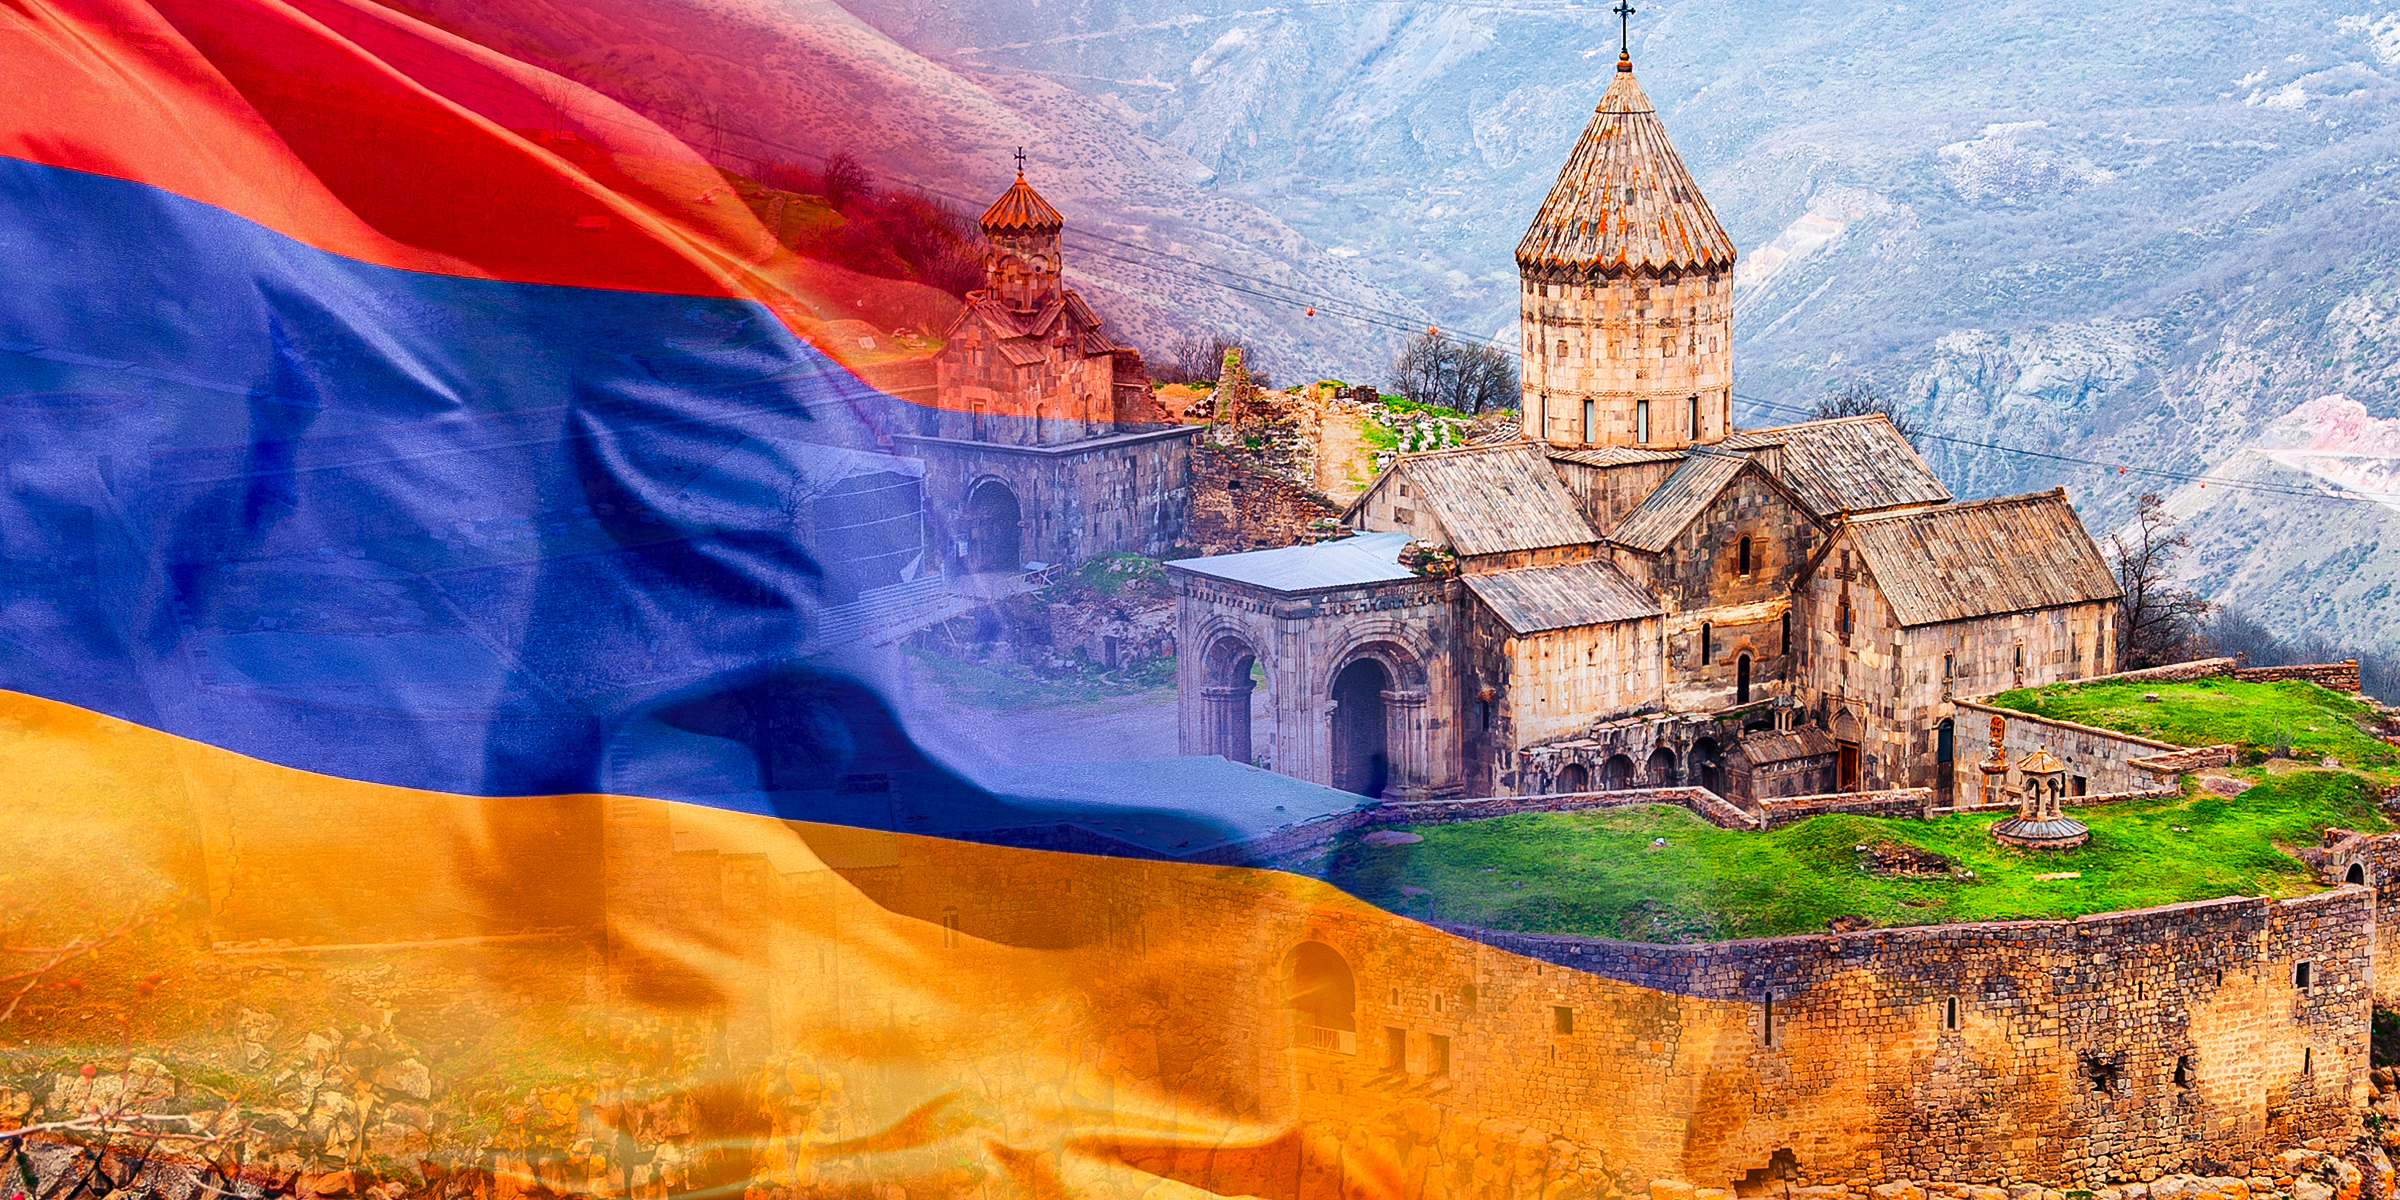 Amenian flag and an ancient building in Armenia | Source: Shutterstock